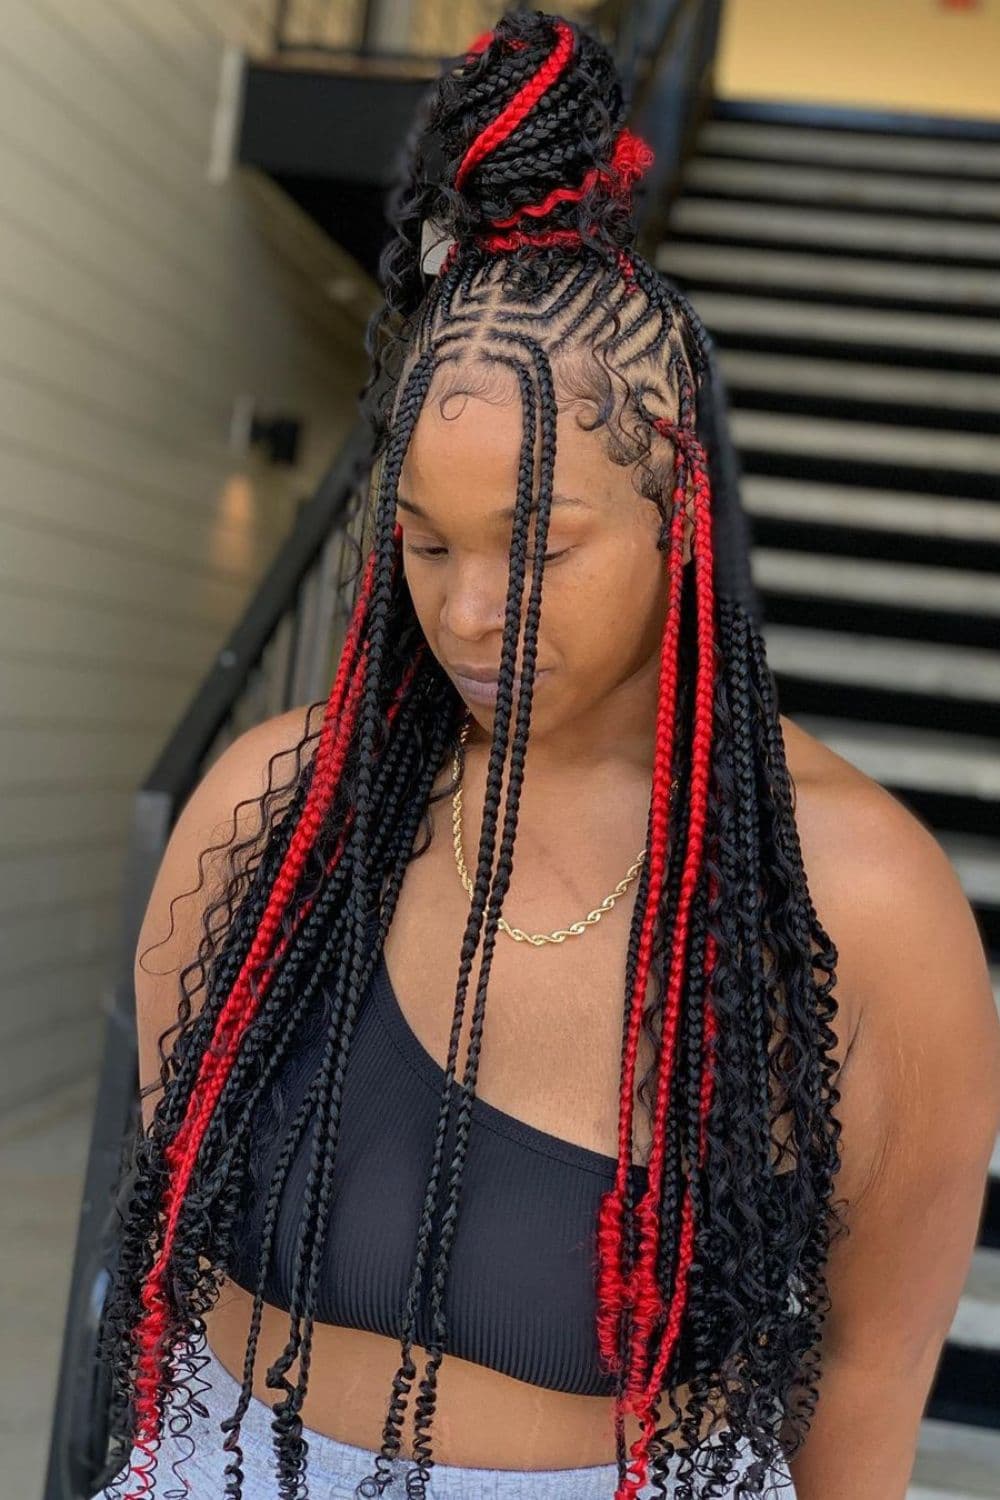 A woman with long black and red knotless braids.